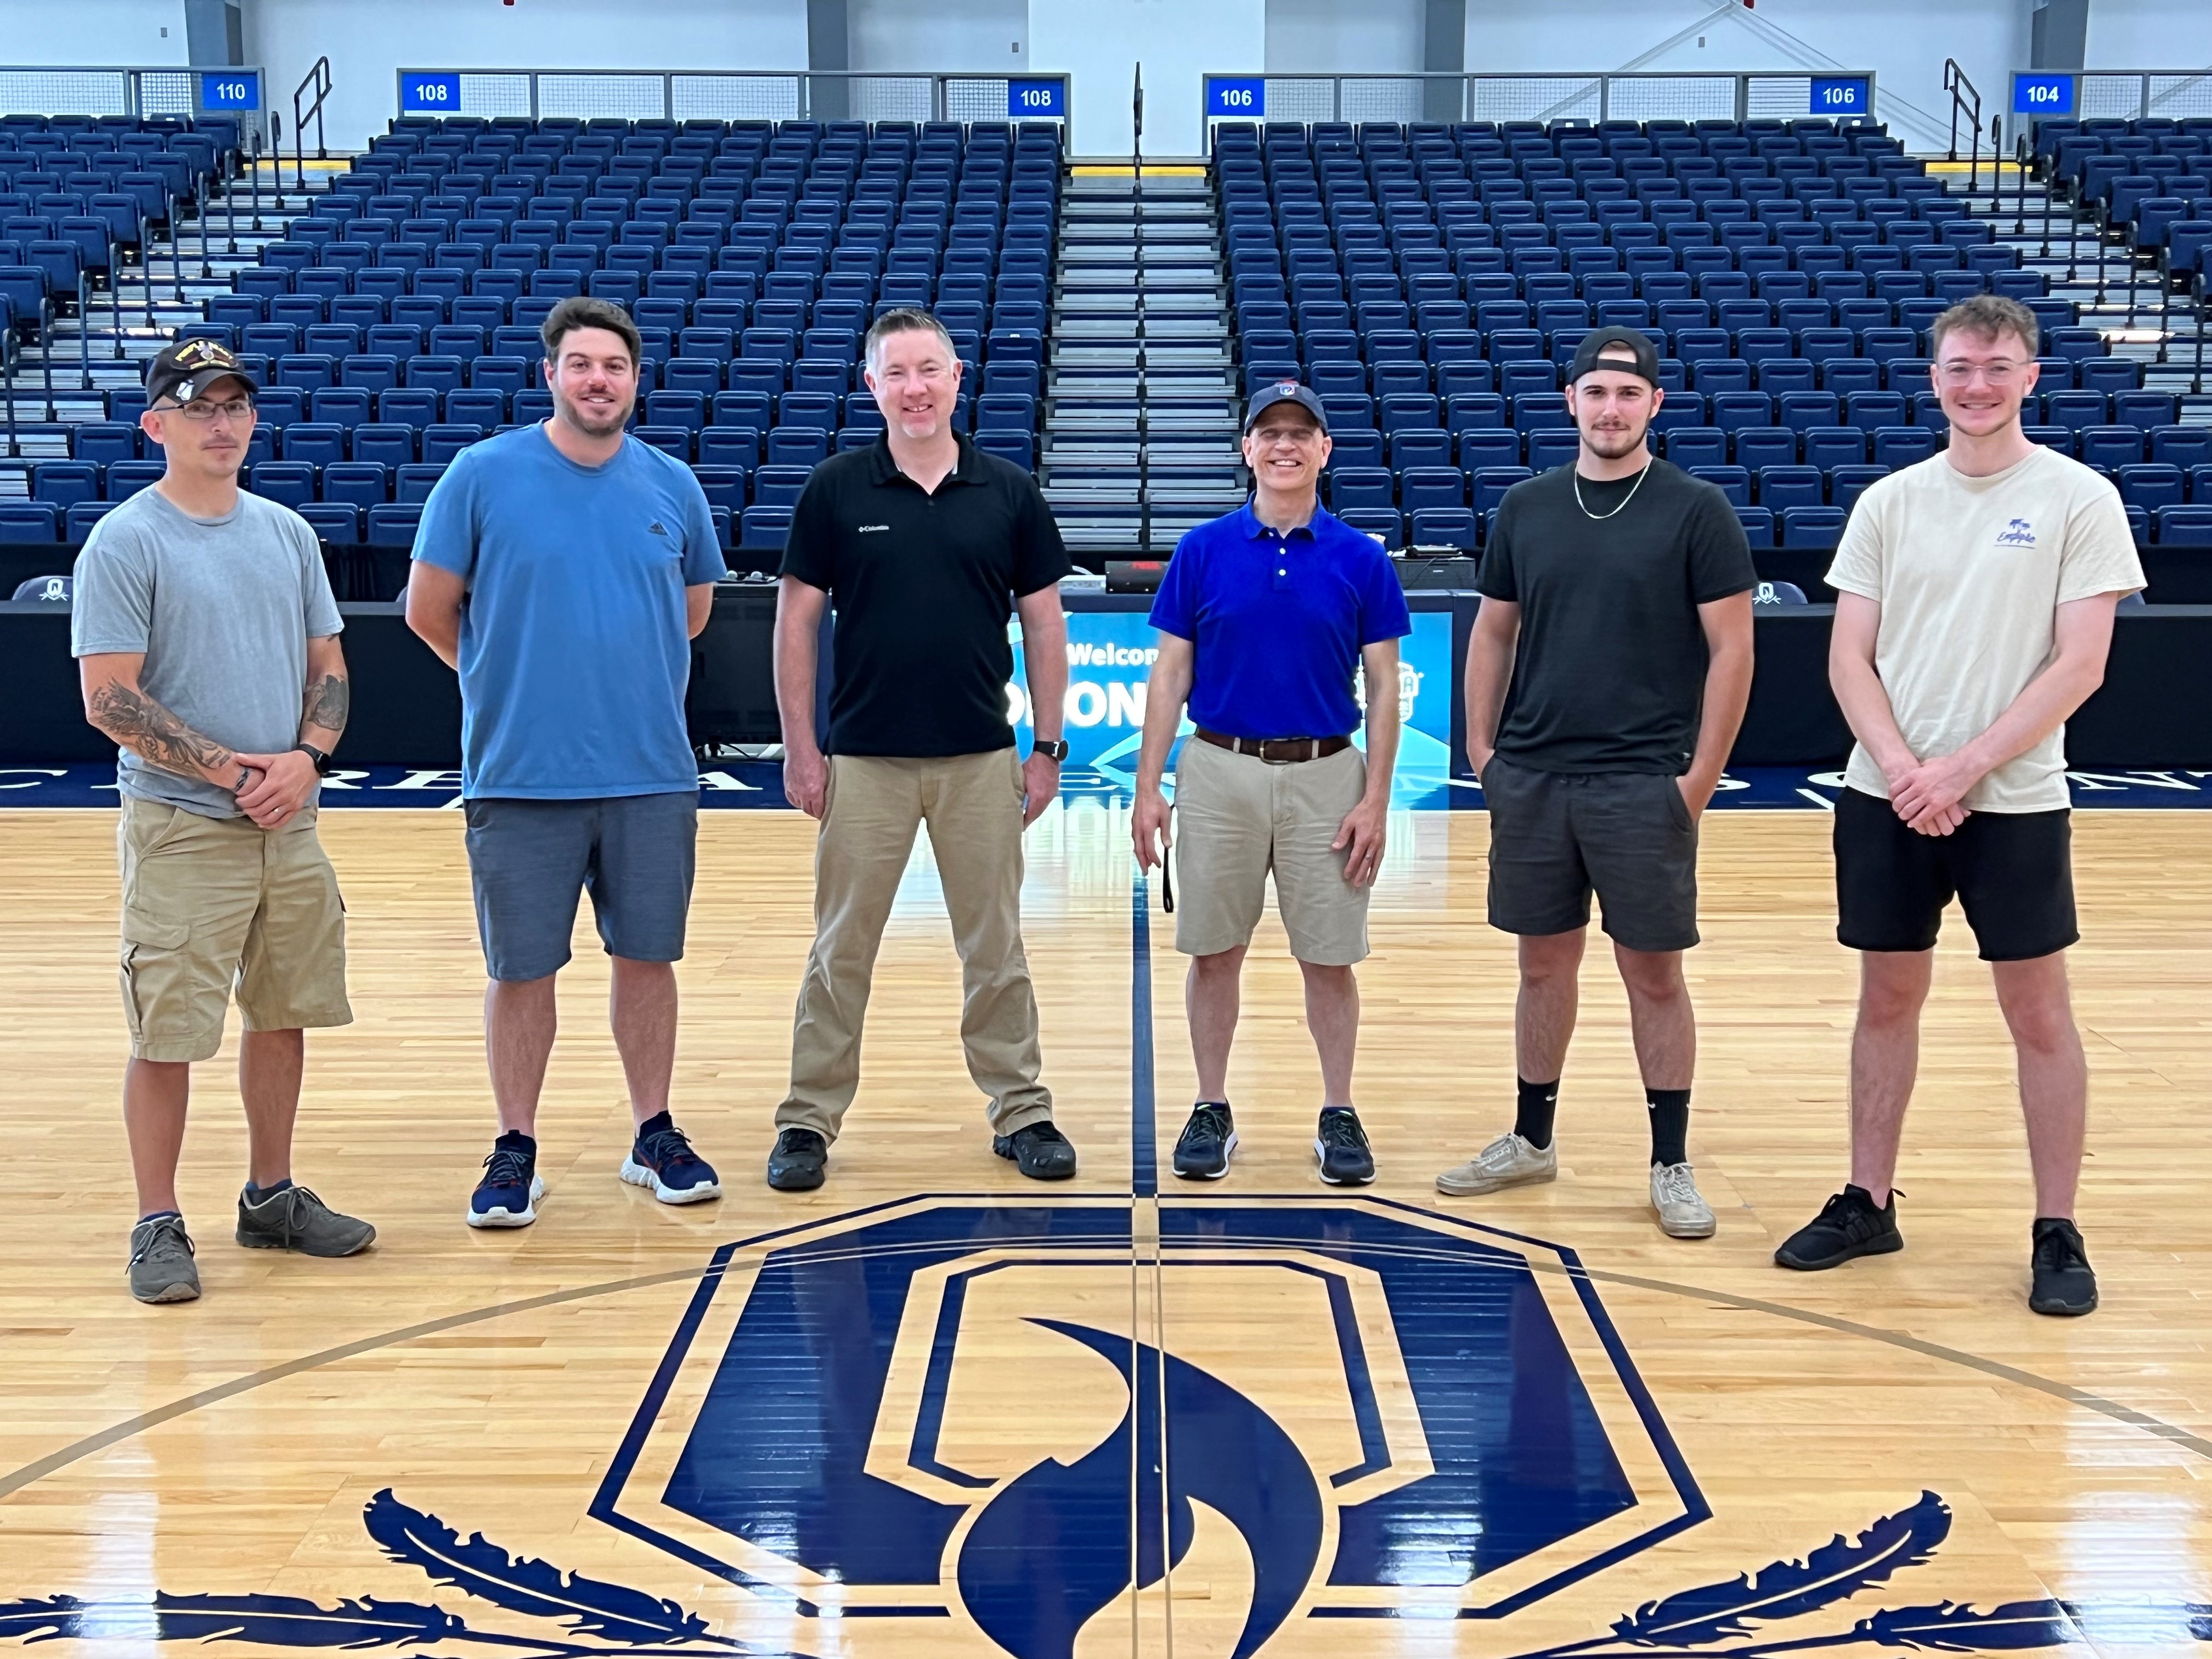 OCC Alums working on the TBT broadcast this weekend include (left to right) Todd Torrance '13, Charles Grant '09, Matt Langley '03, Professor Tony Vadala, Jason Breezee '20, and Joe Scilingo '22.